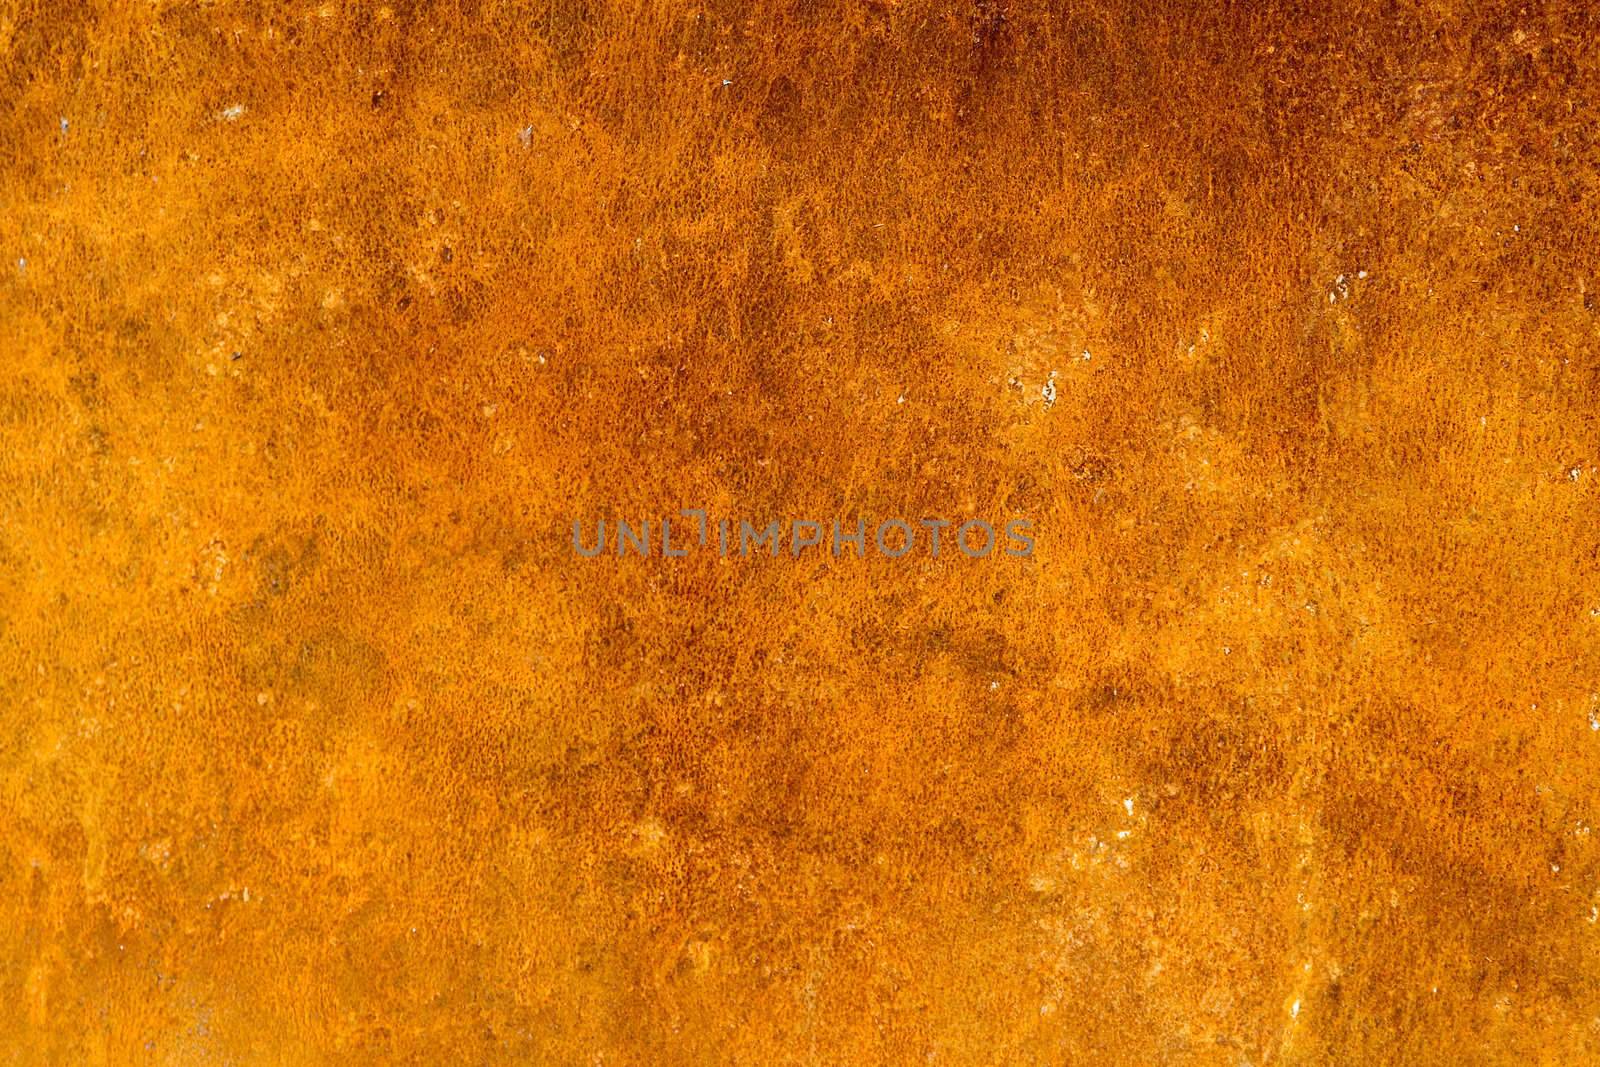 Rusted Metal Background by Sergius